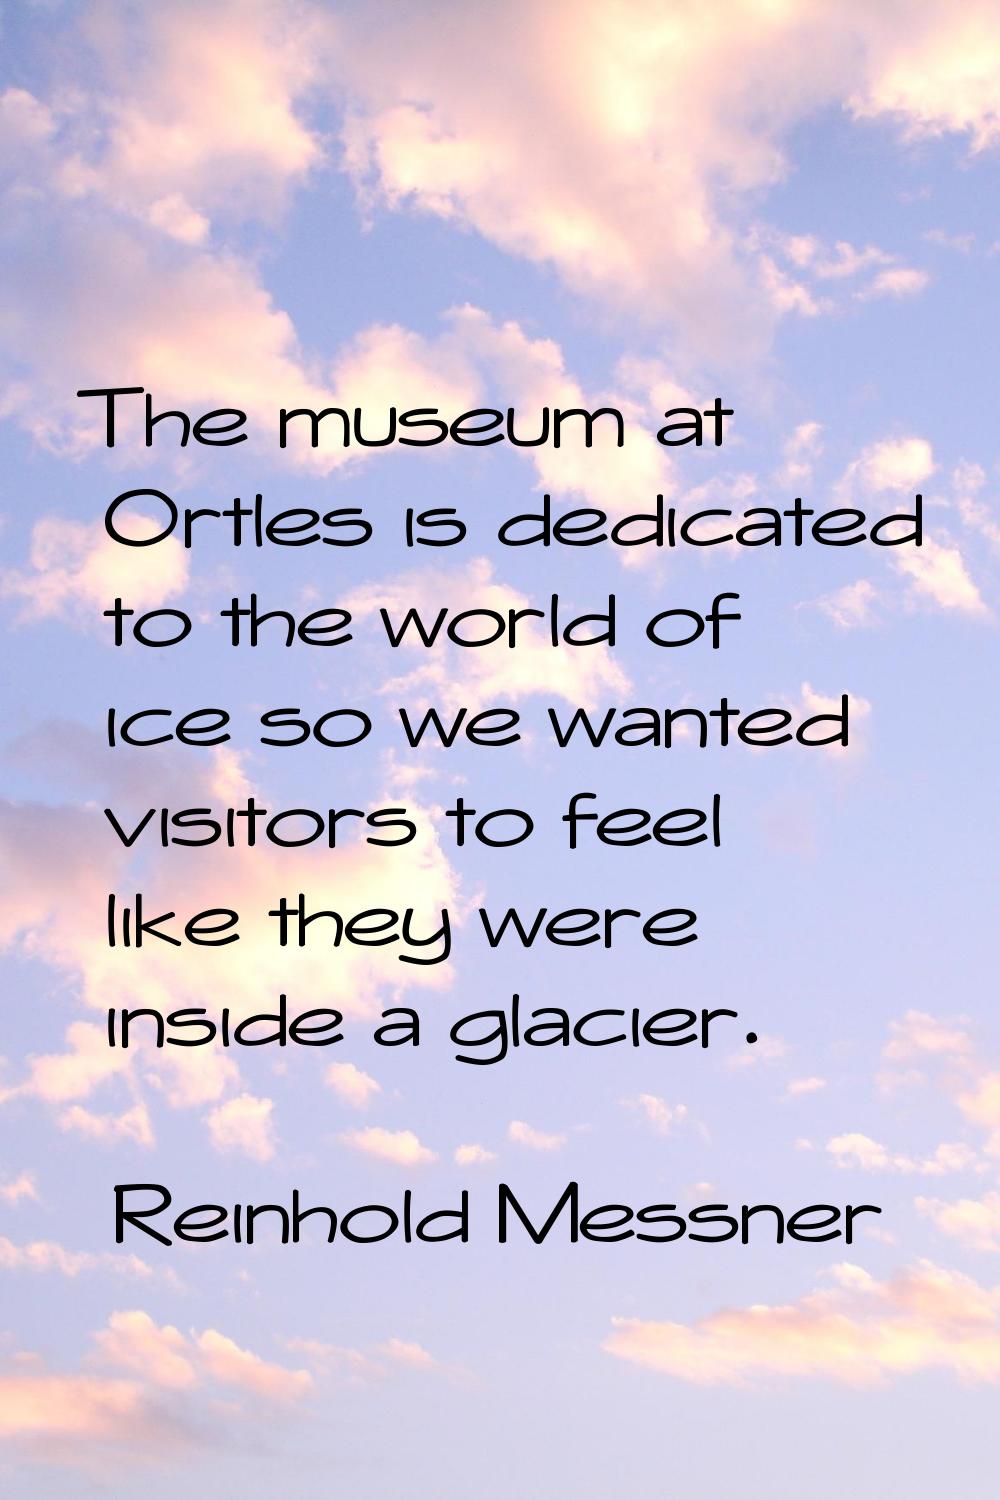 The museum at Ortles is dedicated to the world of ice so we wanted visitors to feel like they were 